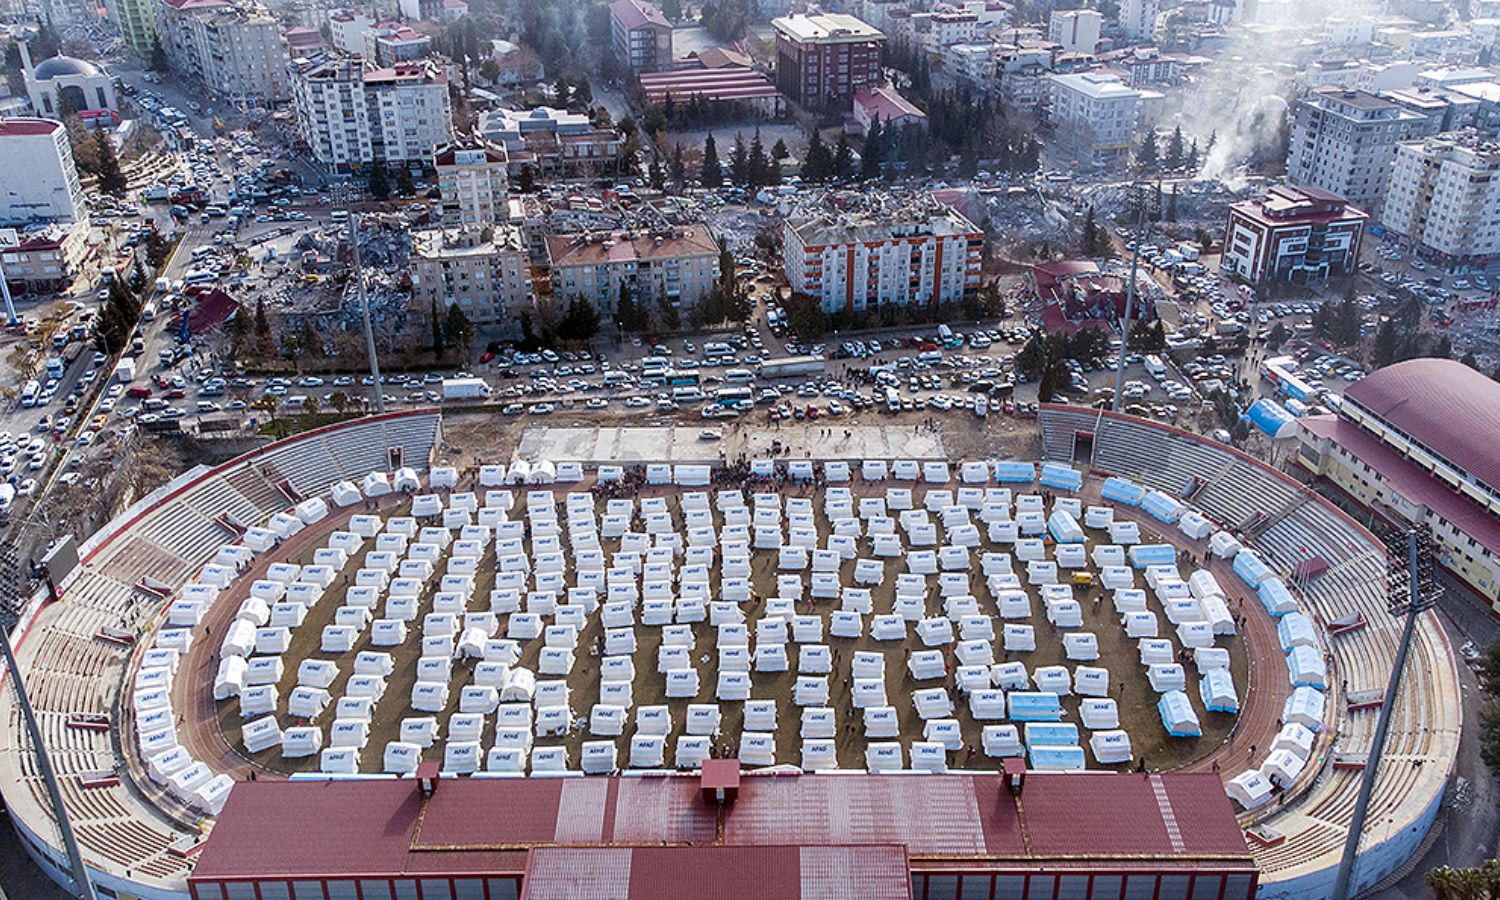 Tents at the "12 Şubat" stadium, which has been turned into a shelter in Kahramanmaraş, southern Turkey, following an earthquake that struck the area - February 8, 2023 (Anadolu Agency)